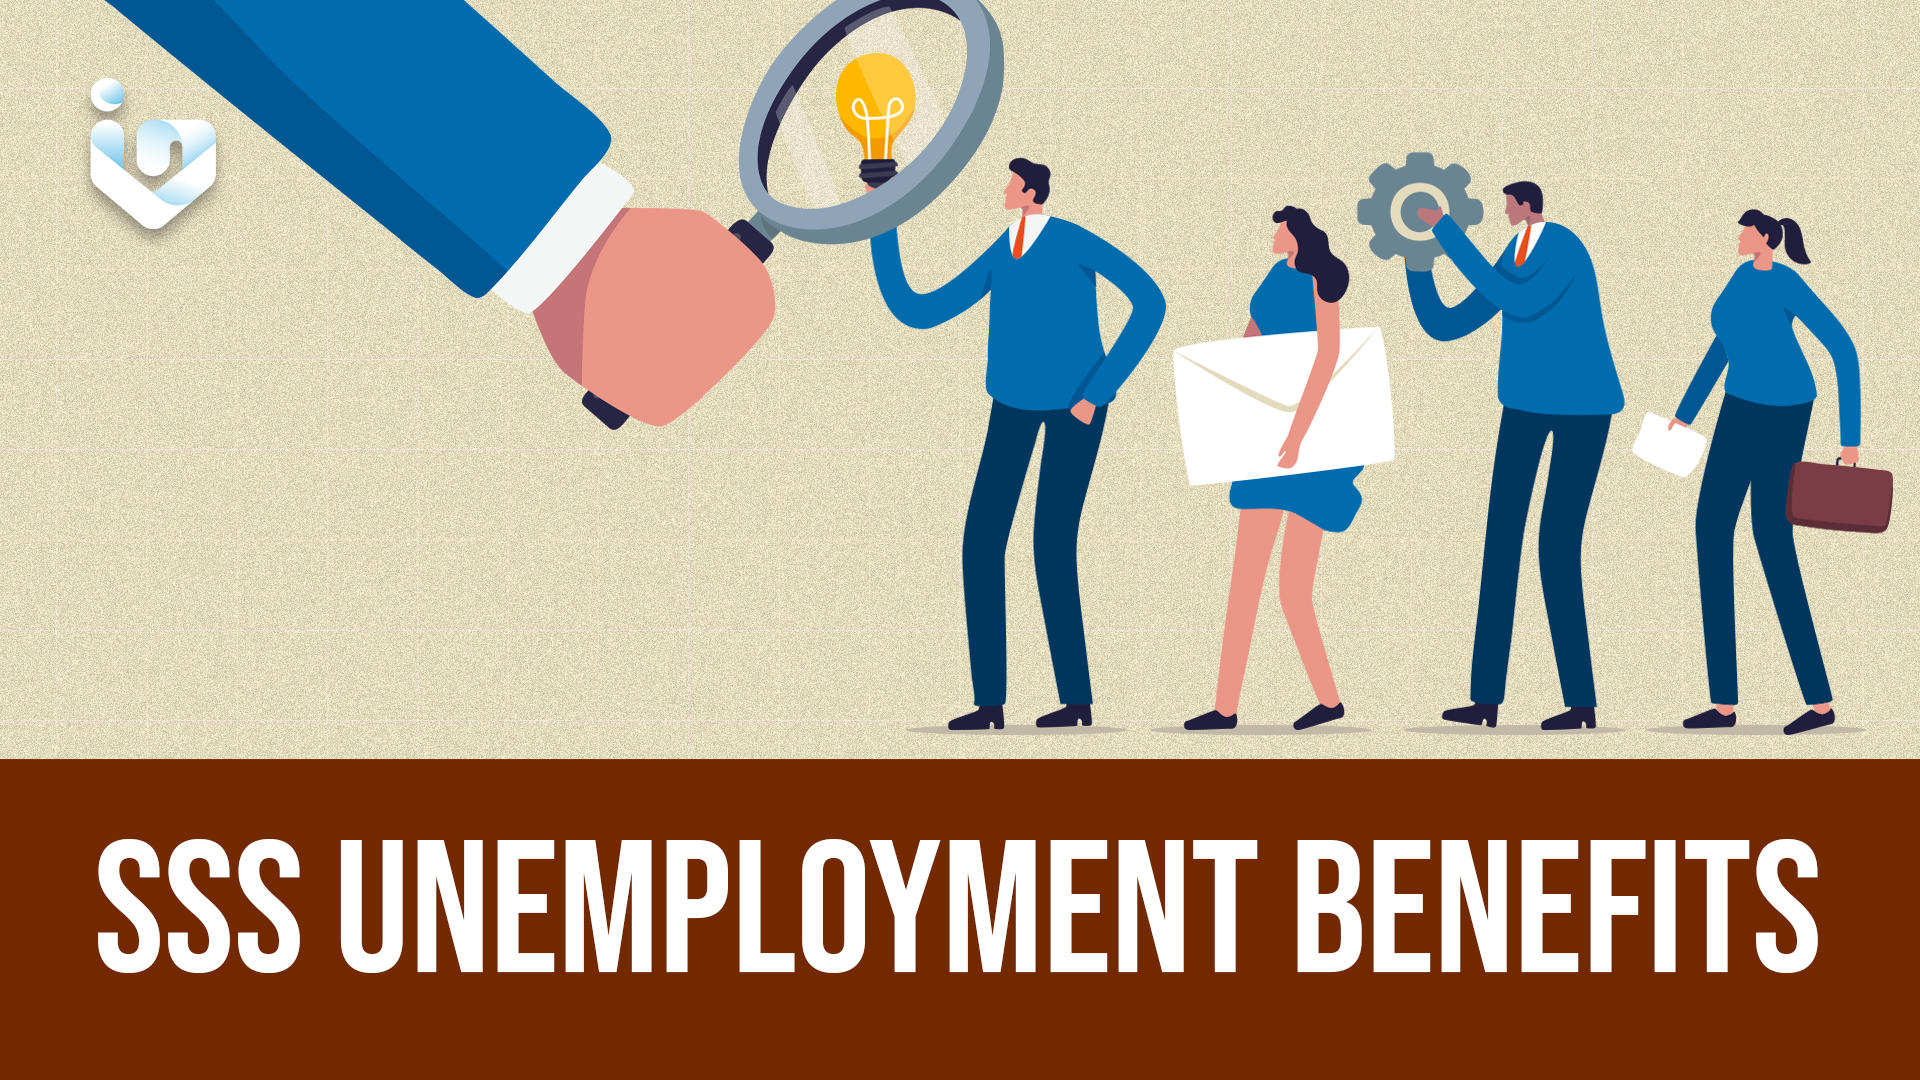 SSS Unemployment Benefits: What You Need to Know